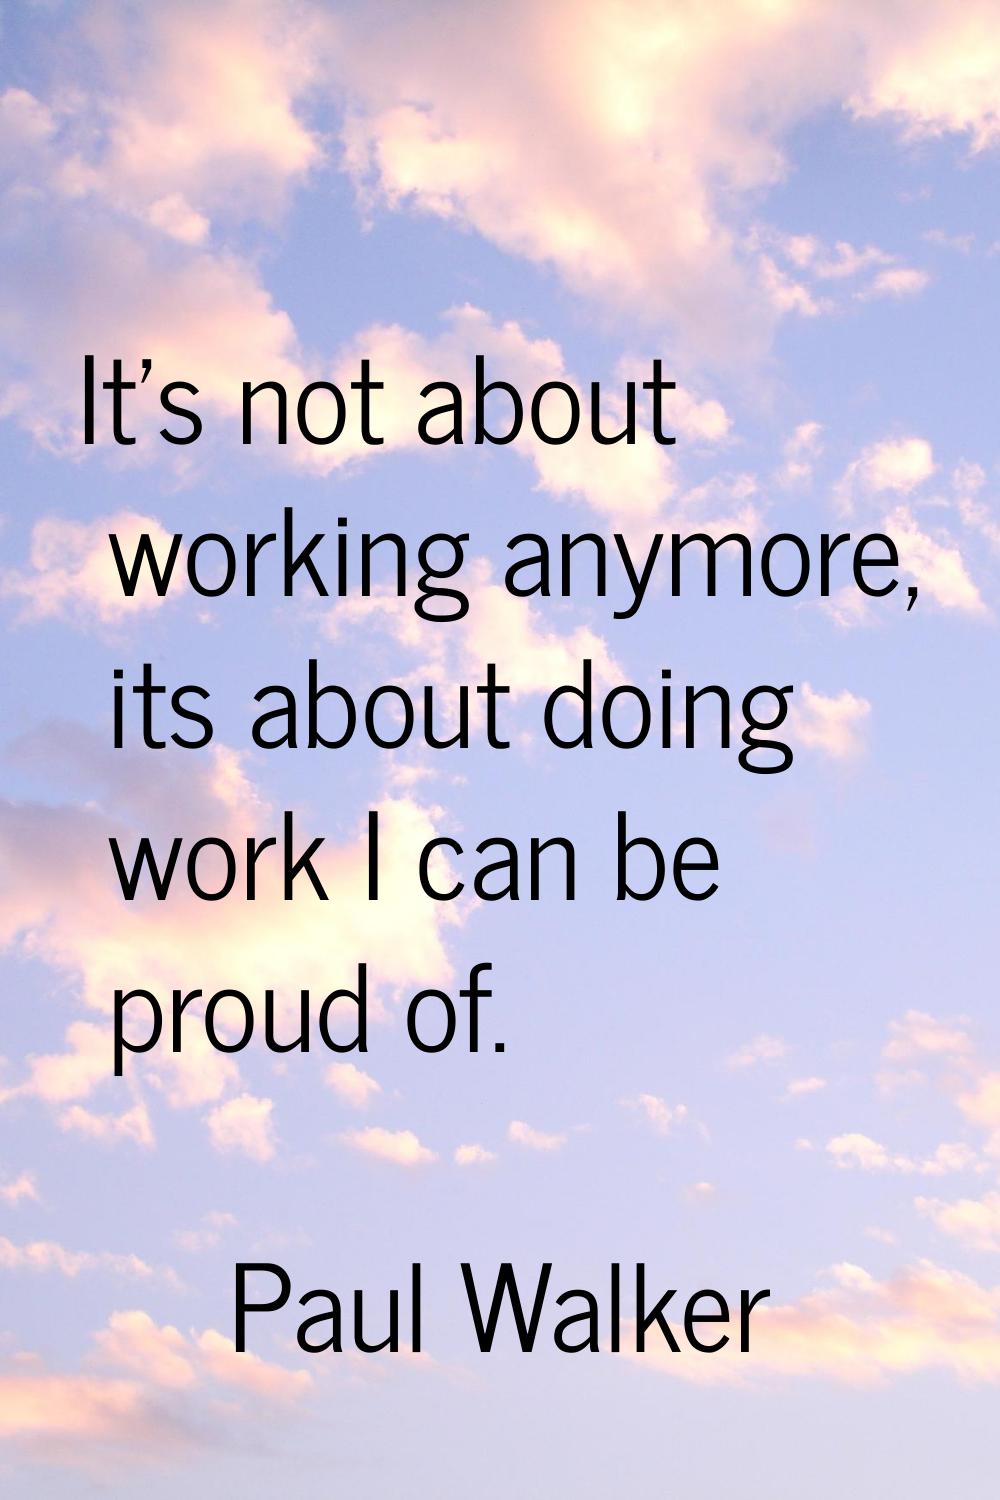 It's not about working anymore, its about doing work I can be proud of.